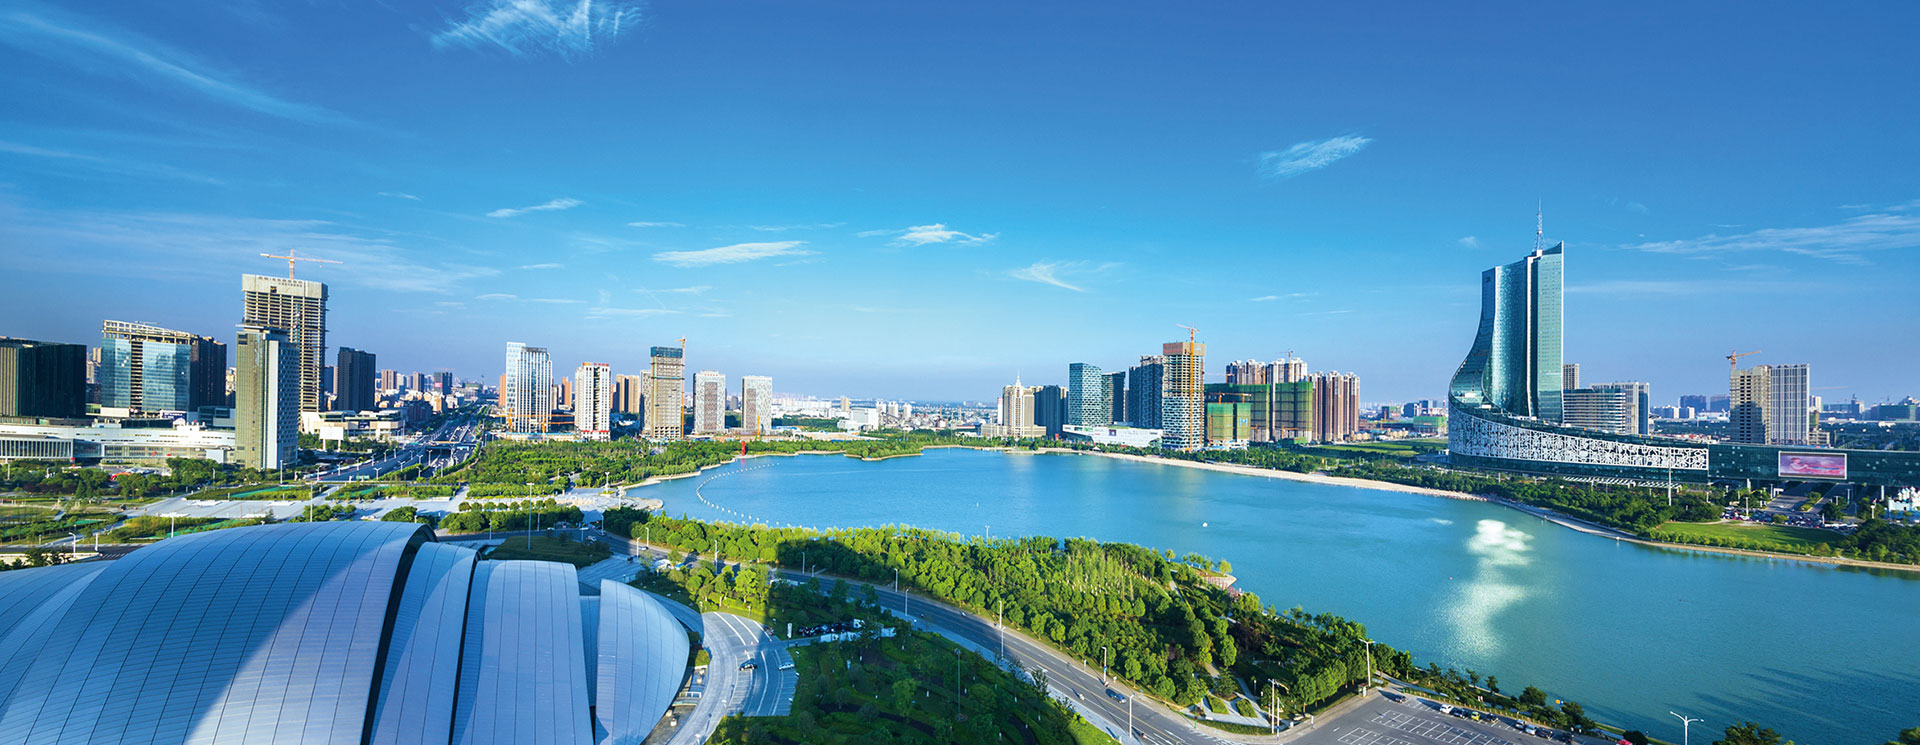 Hefei city issues policies to foster high-growth enterprises